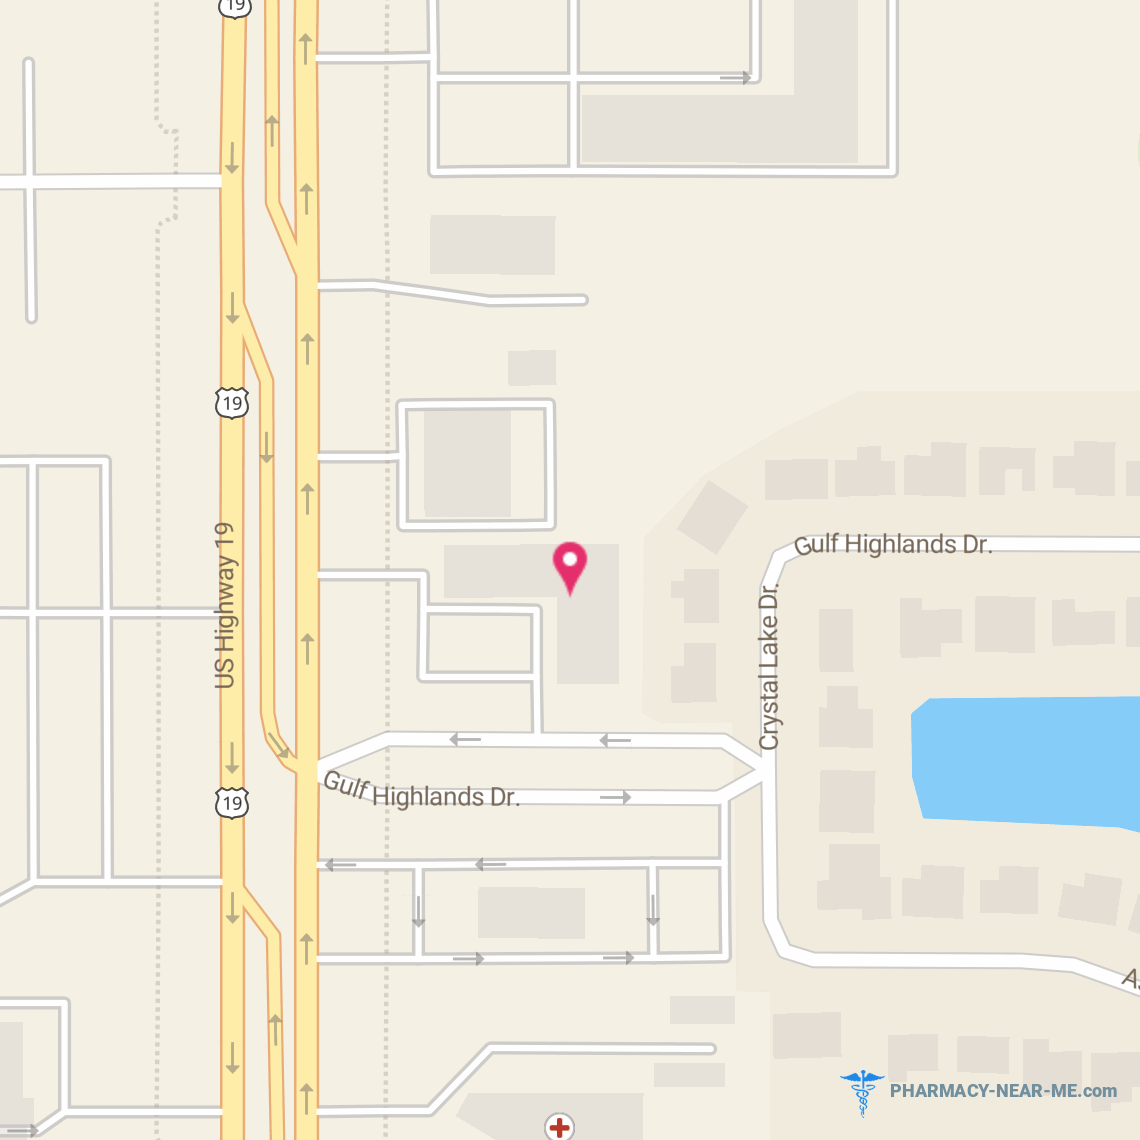 MEDILINK PHARMACY - Pharmacy Hours, Phone, Reviews & Information: 11618 US Route 19, Port Richey, Florida 34668, United States